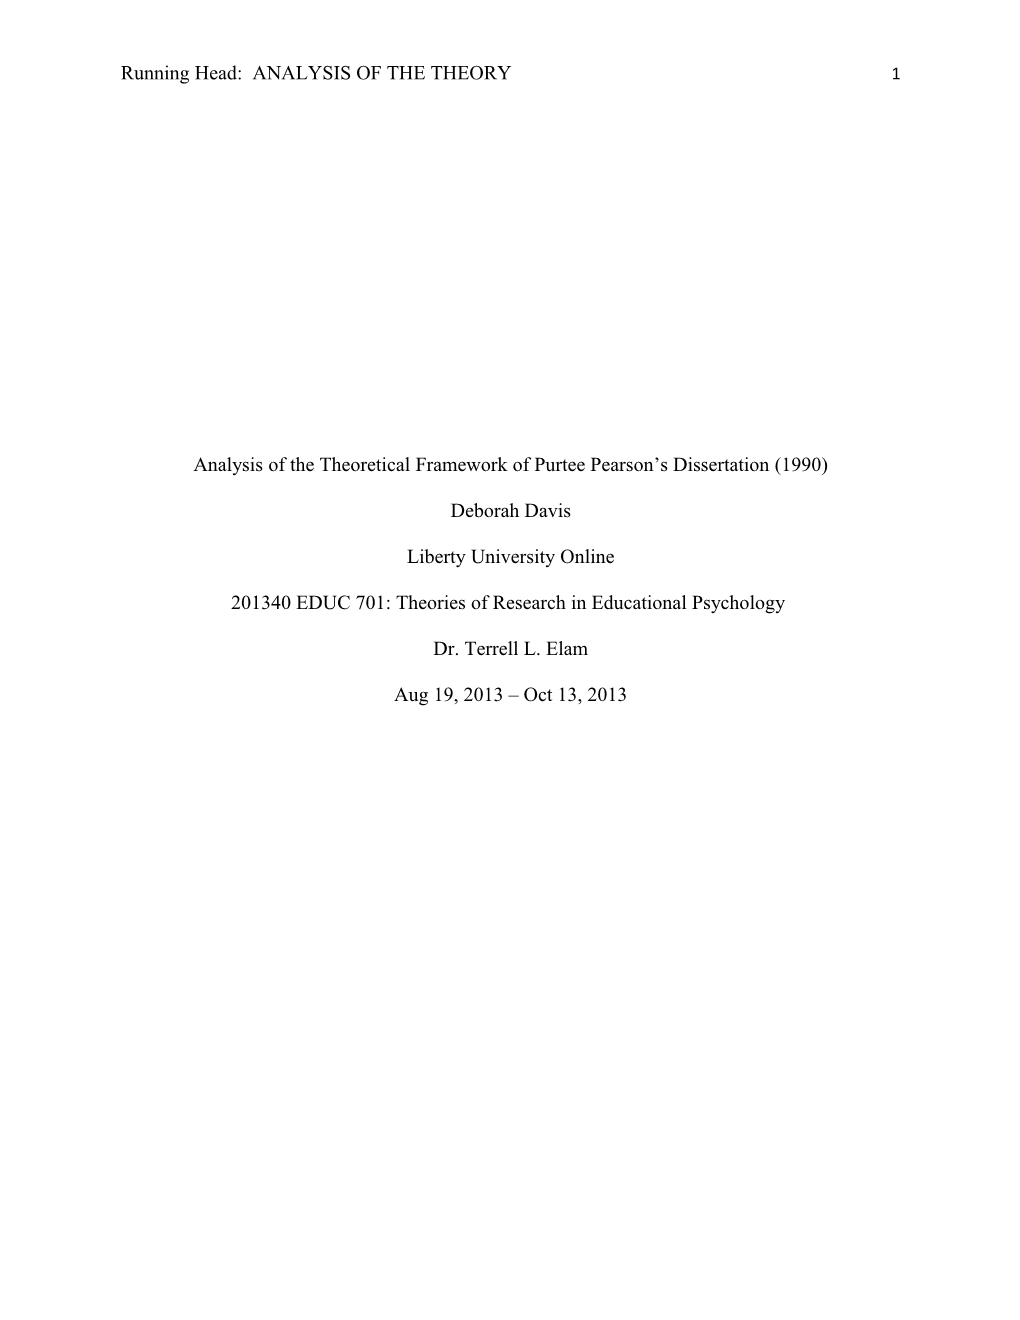 Analysis of the Theoretical Framework of Purtee Pearson S Dissertation (1990)